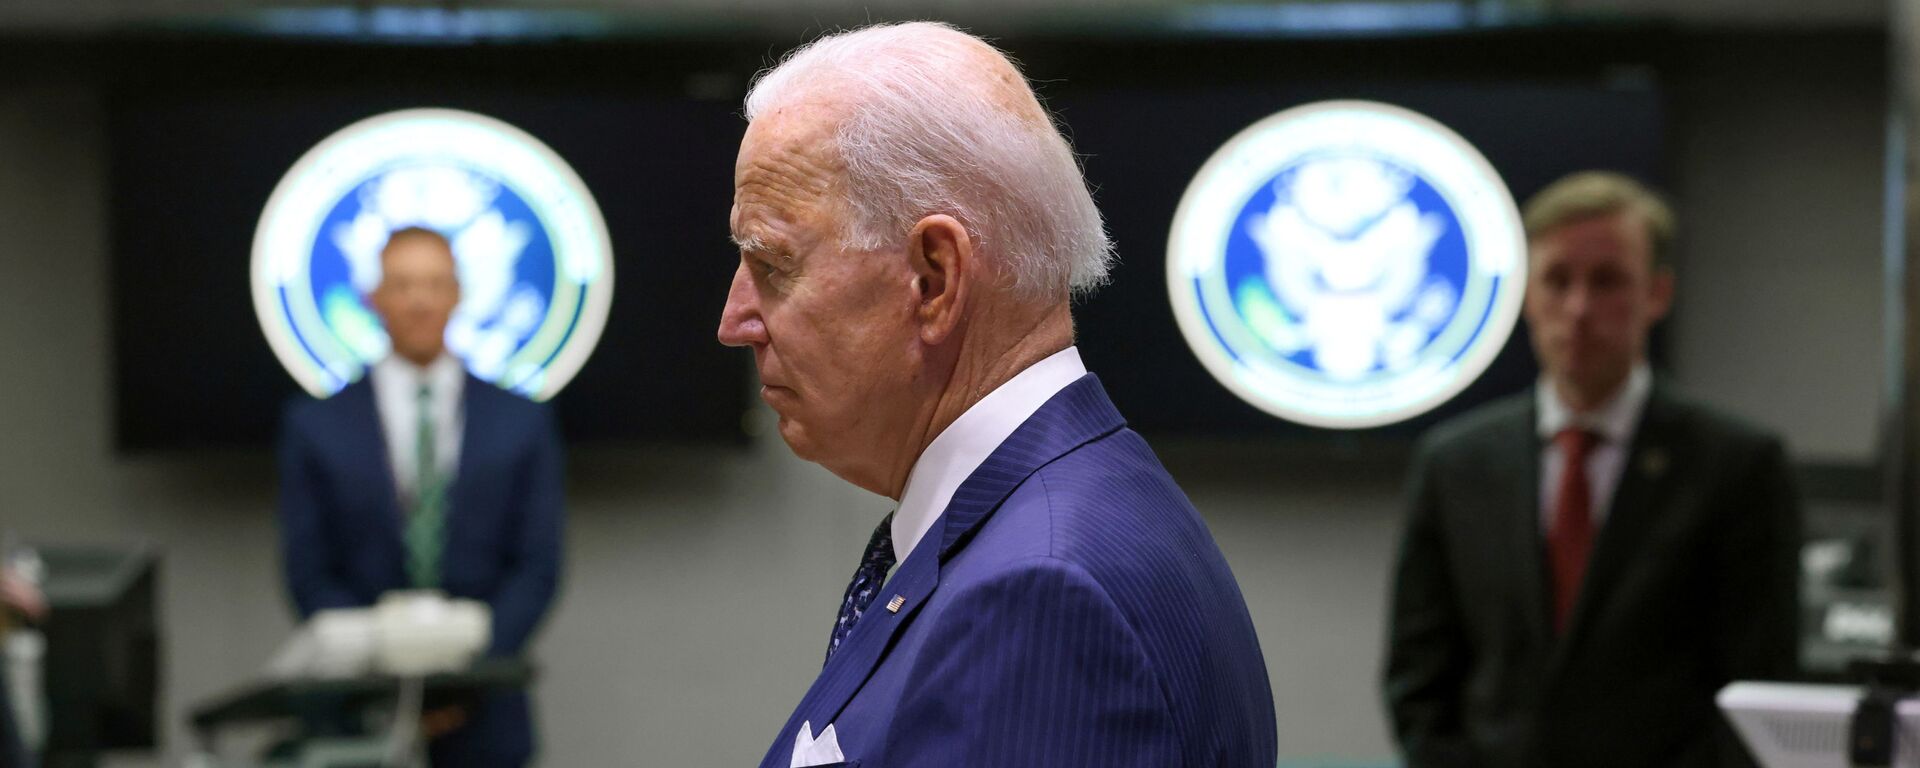  U.S. President Joe Biden tours the National Counterterrorism Center Watch Floor during a visit to the Office of the Director of National Intelligence in nearby McLean, Virginia outside Washington, U.S., July 27, 2021 - Sputnik International, 1920, 28.07.2021